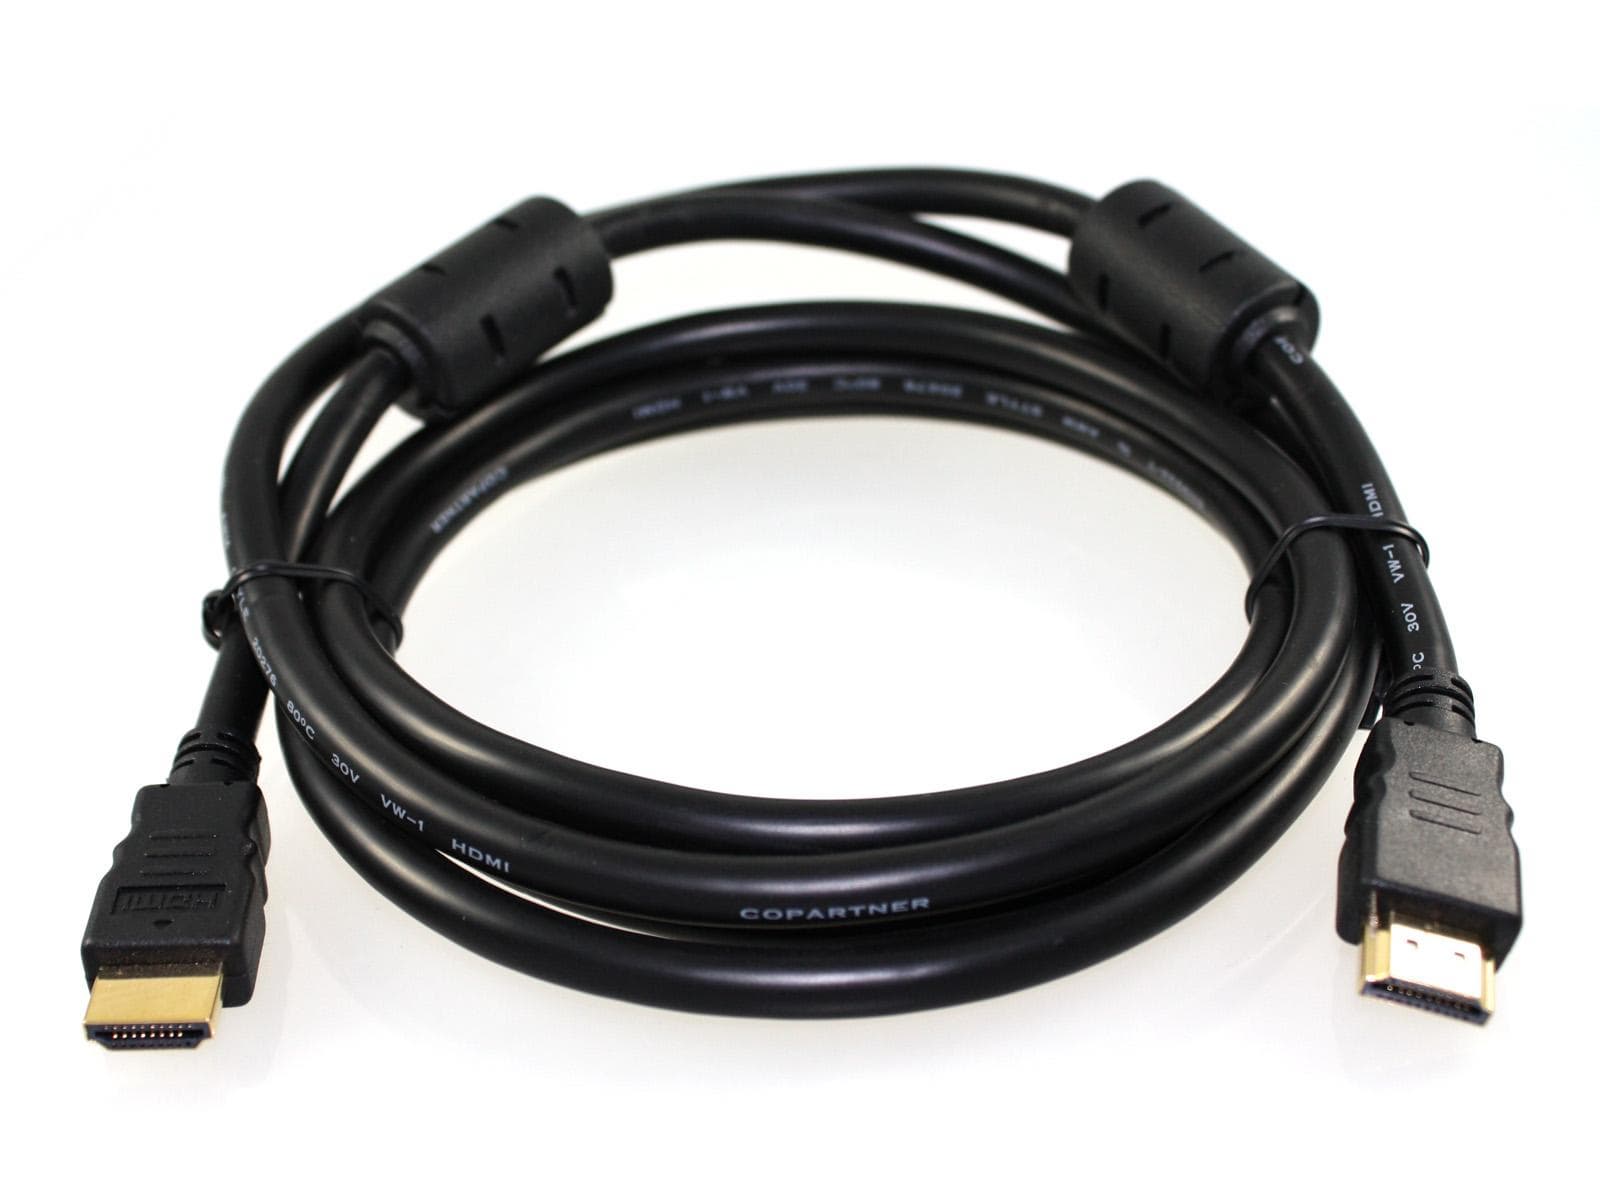 HDMI AM to AM Cable, Ferrite Core Cable